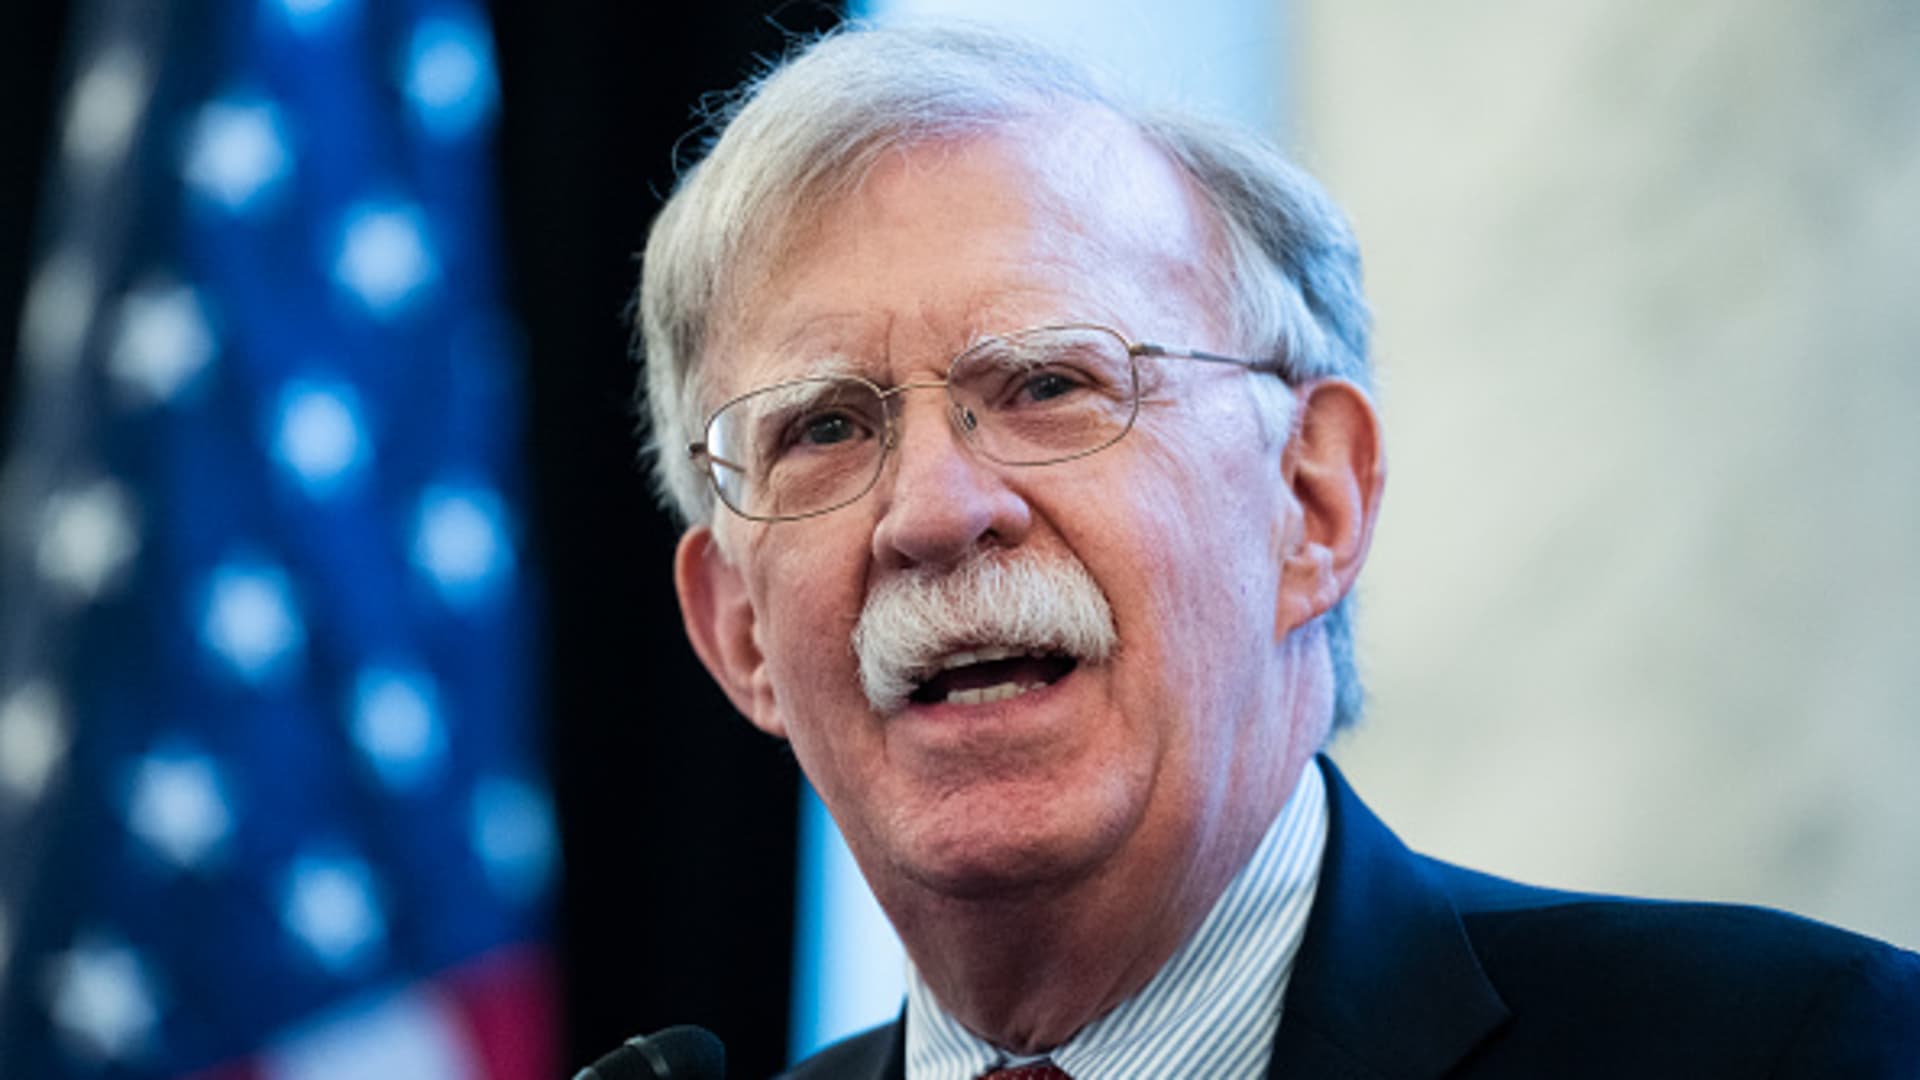 John Bolton, former national security advisor, speaks during a Senate briefing hosted by the Organization of Iranian American Communities to discuss U.S. policy on Iran, in Washington, D.C., March 16, 2023.